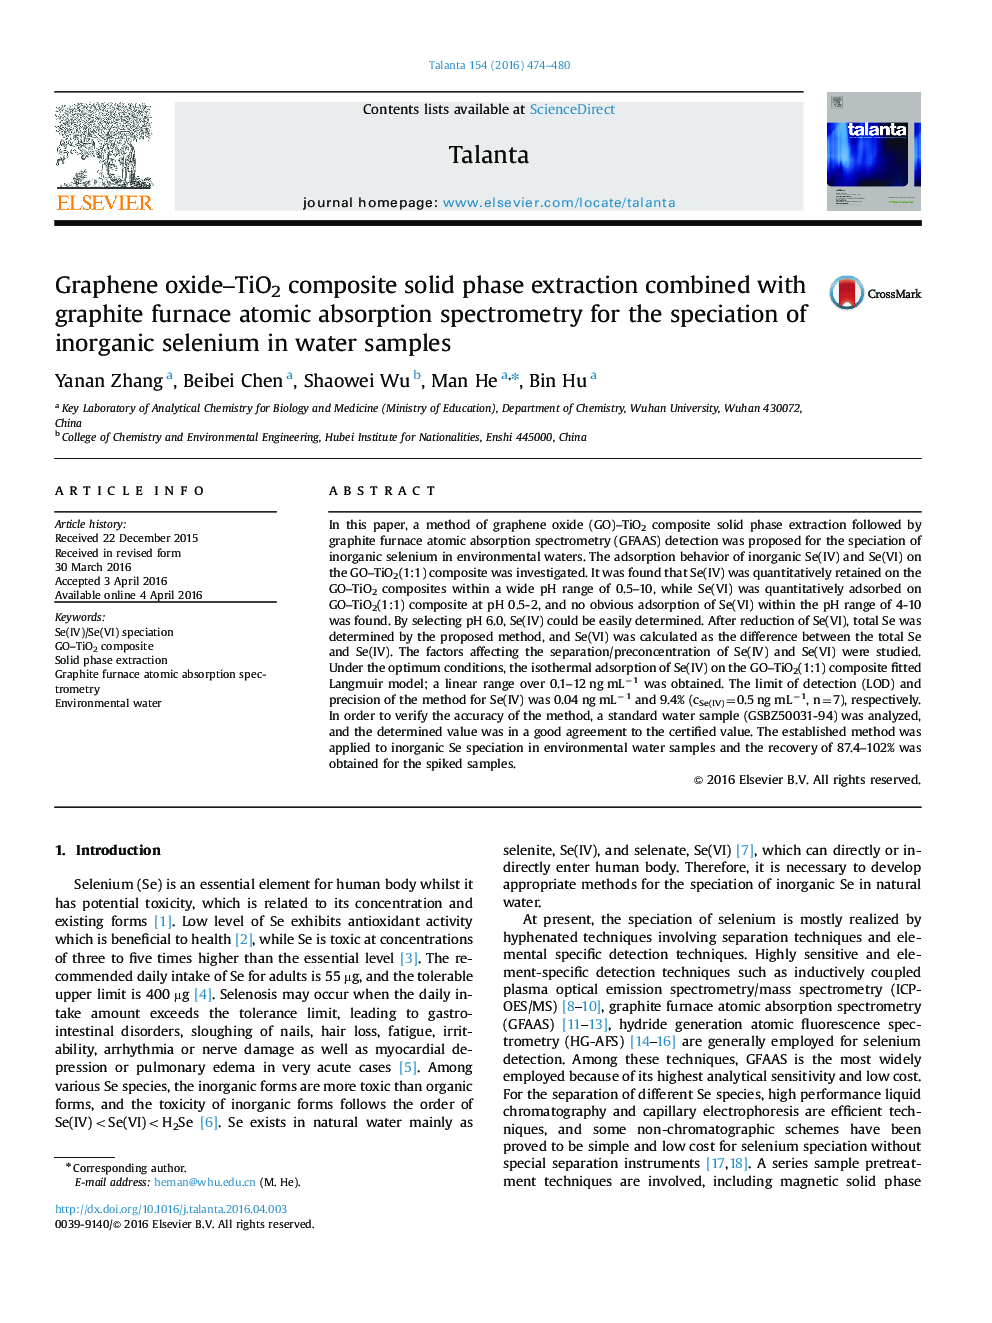 Graphene oxide-TiO2 composite solid phase extraction combined with graphite furnace atomic absorption spectrometry for the speciation of inorganic selenium in water samples